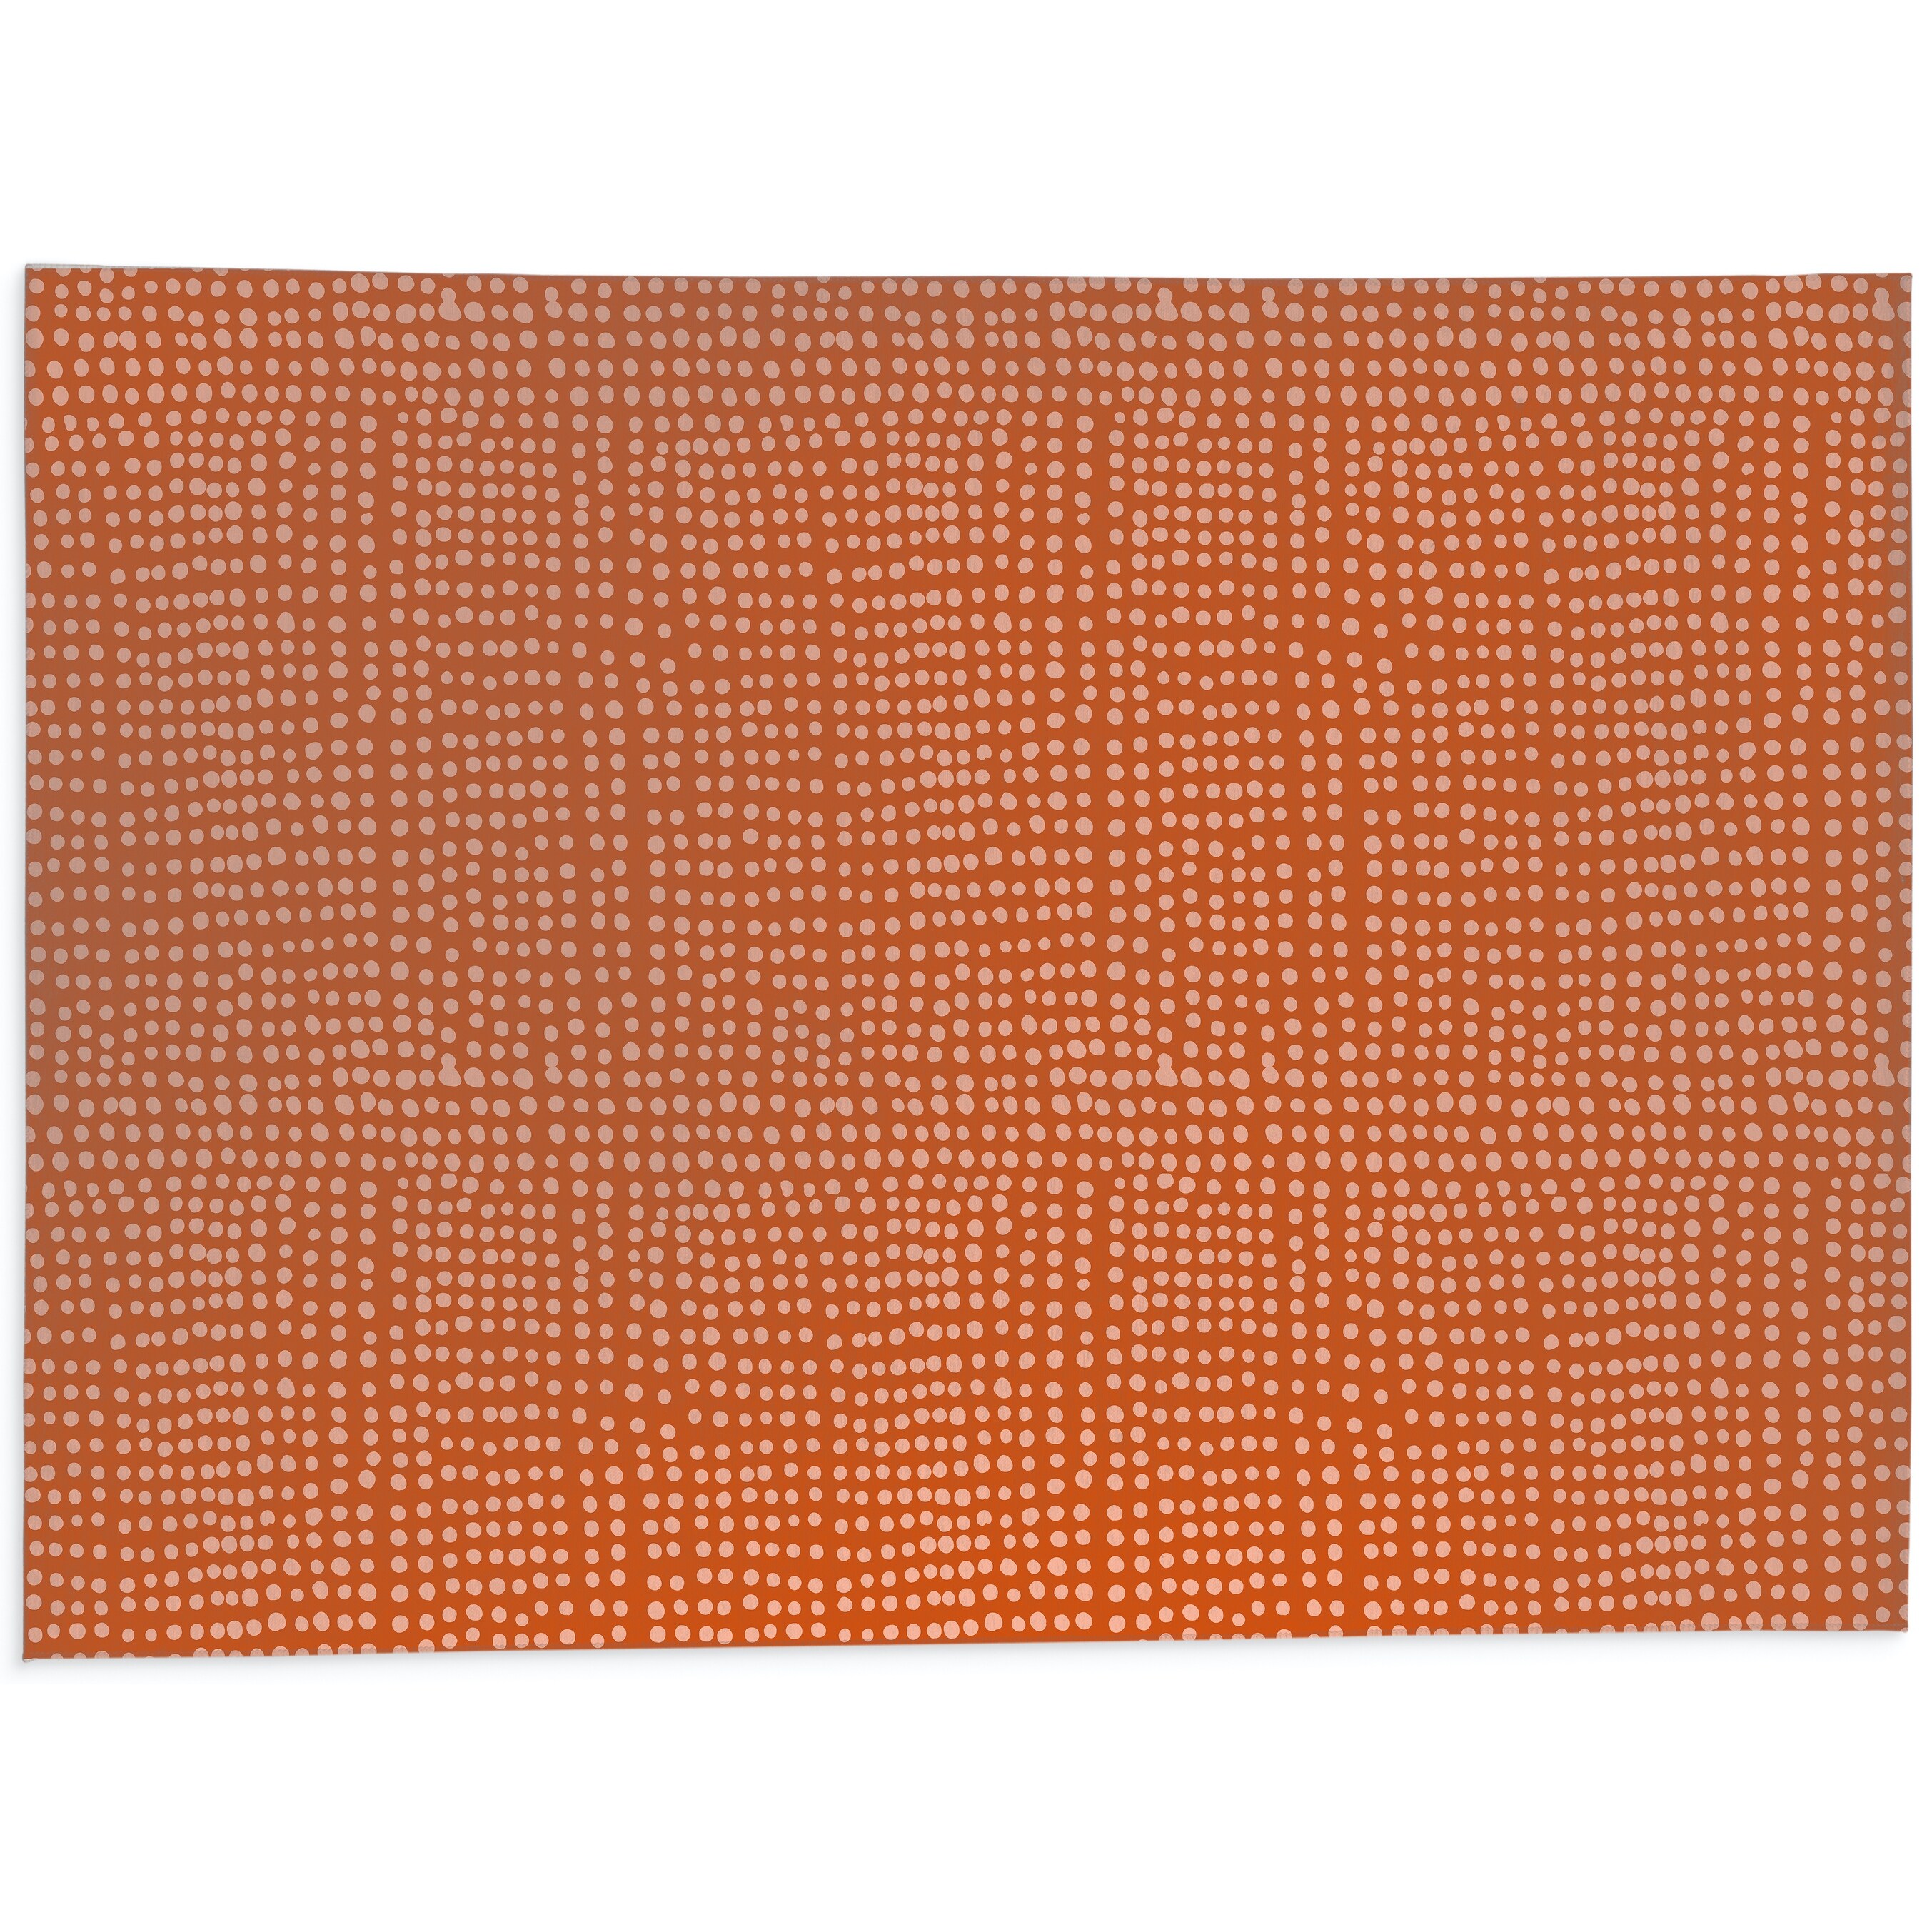 https://ak1.ostkcdn.com/images/products/is/images/direct/5f7030cf7f34cc4ee5b177d9662321e5327eb5e1/DOTS-ABSTRACT-TERRACOTTA-Indoor-Door-Mat-By-Kavka-Designs.jpg